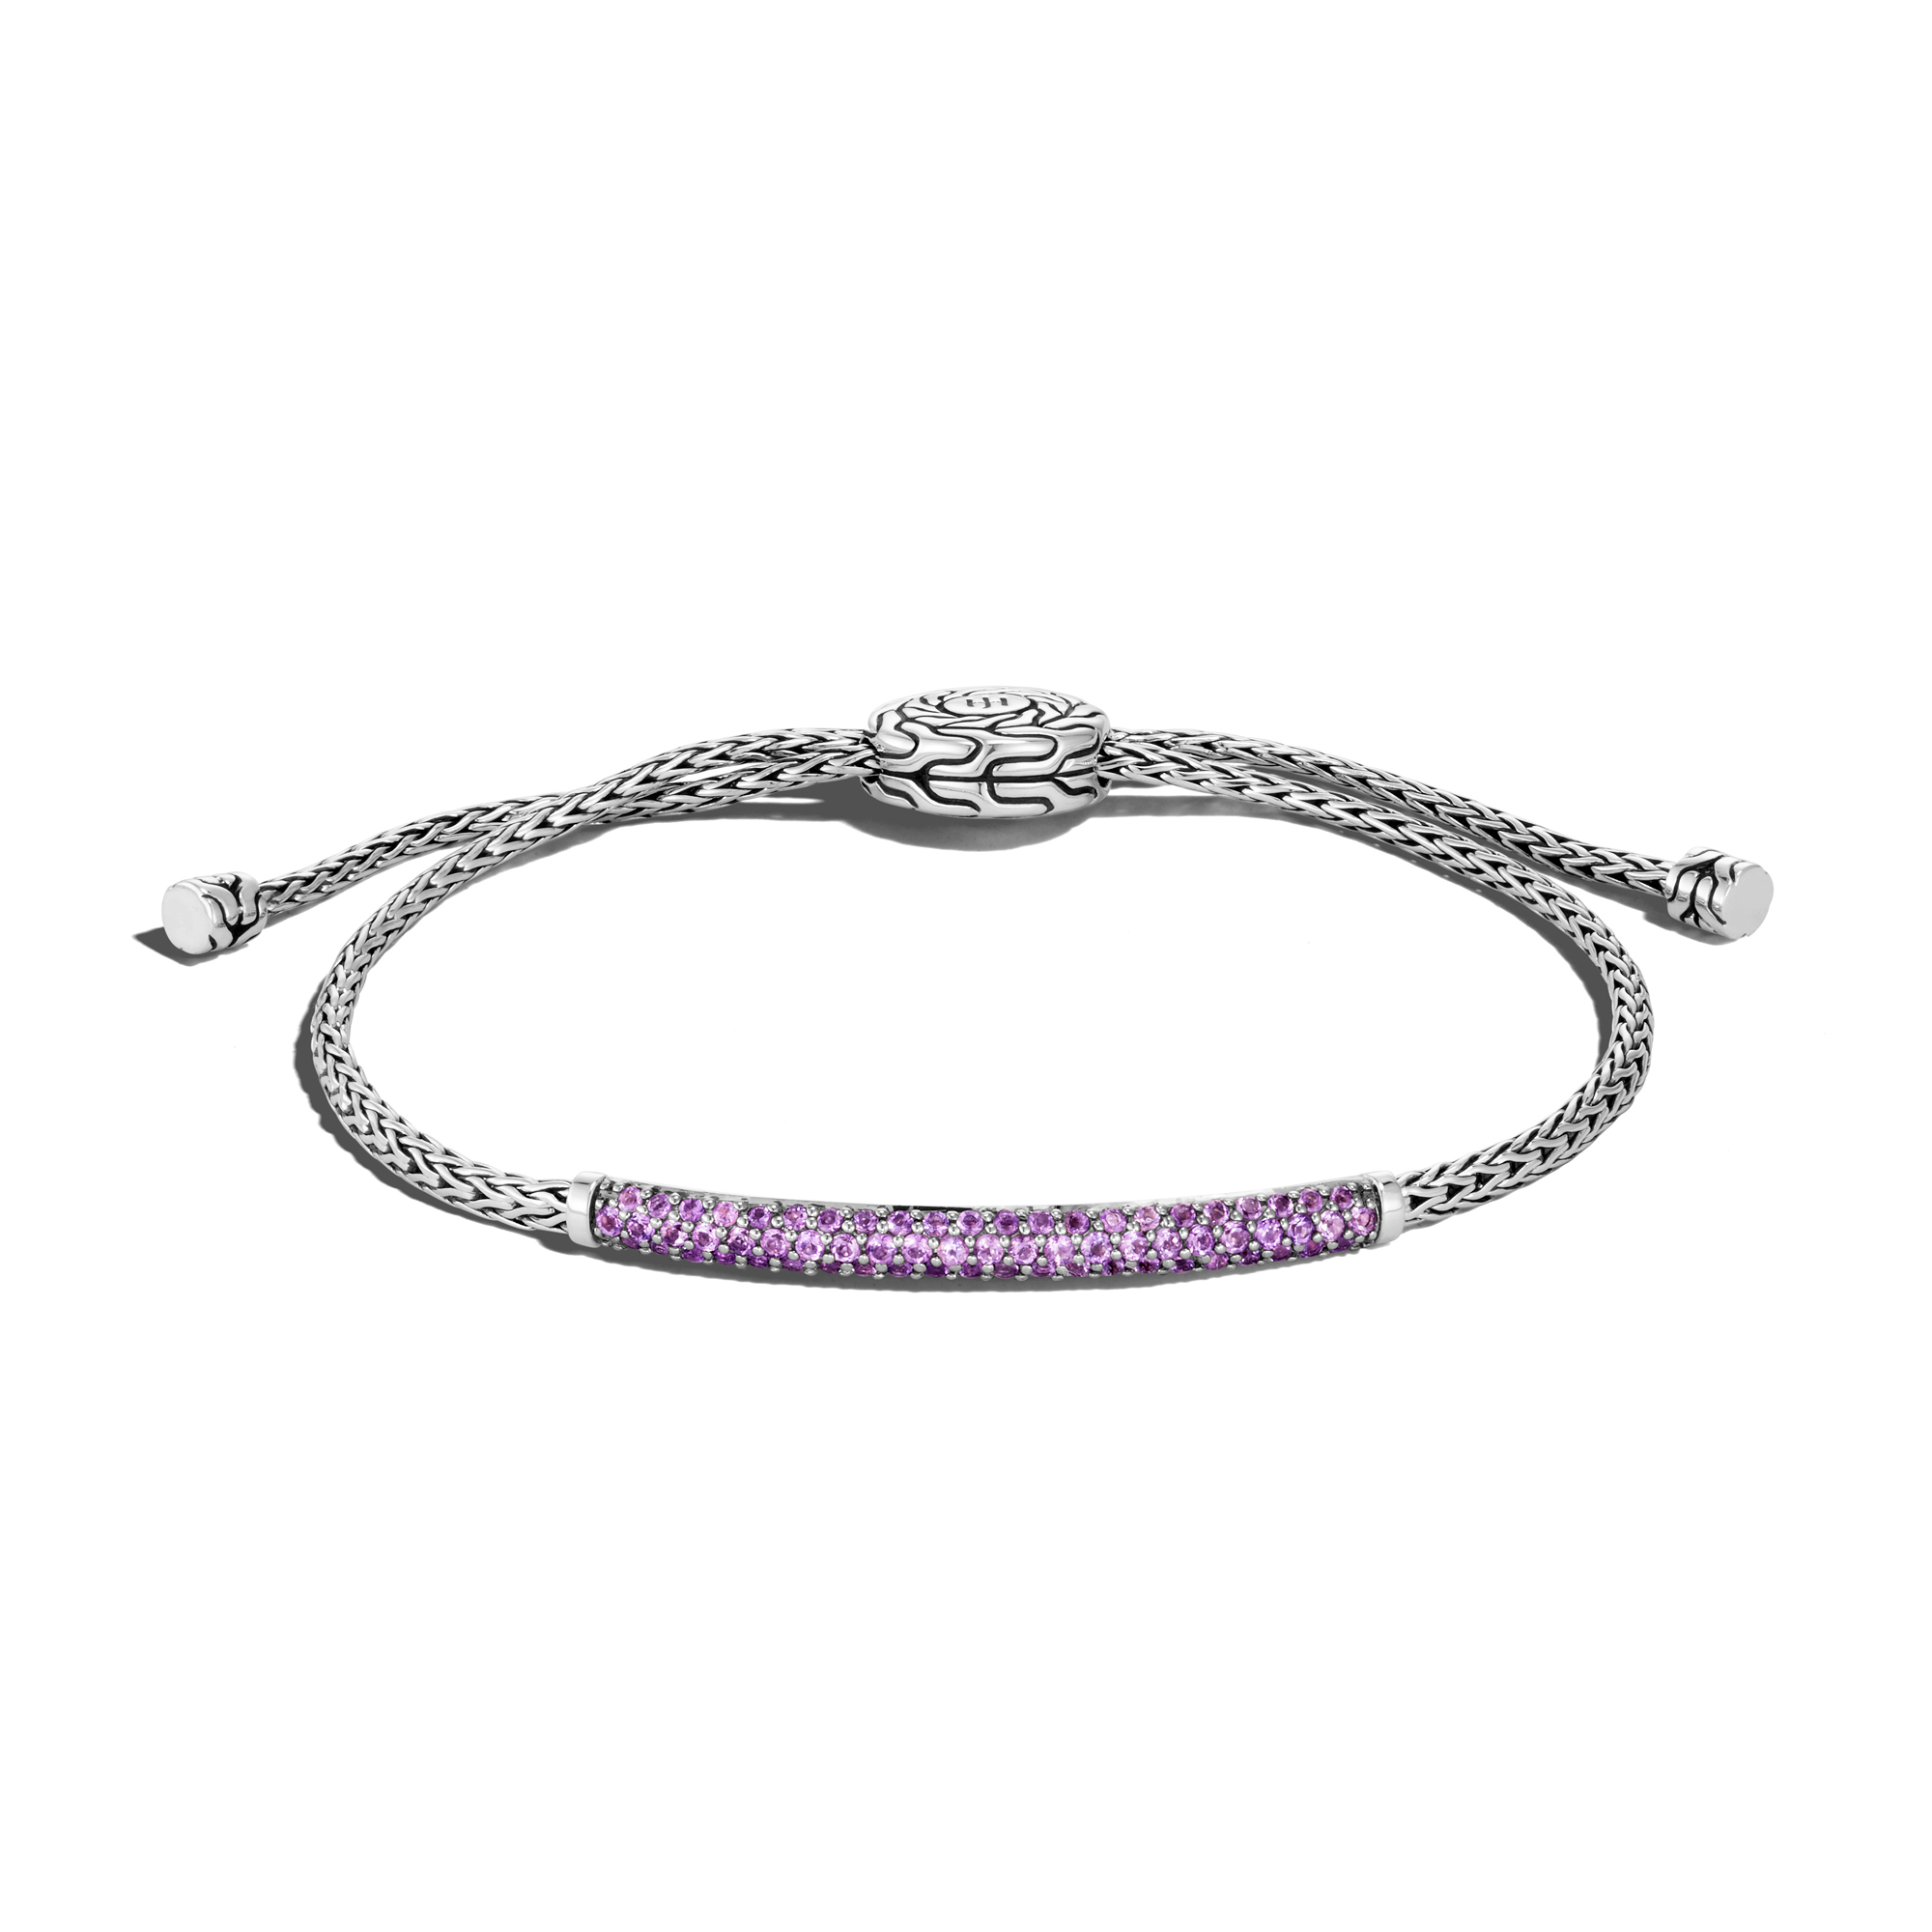 Sunrise Jewels Women's Natural Amethyst Gemstone Silver Plated Handmade Bracelet Jewelry 8 Inches with Adjustable Links